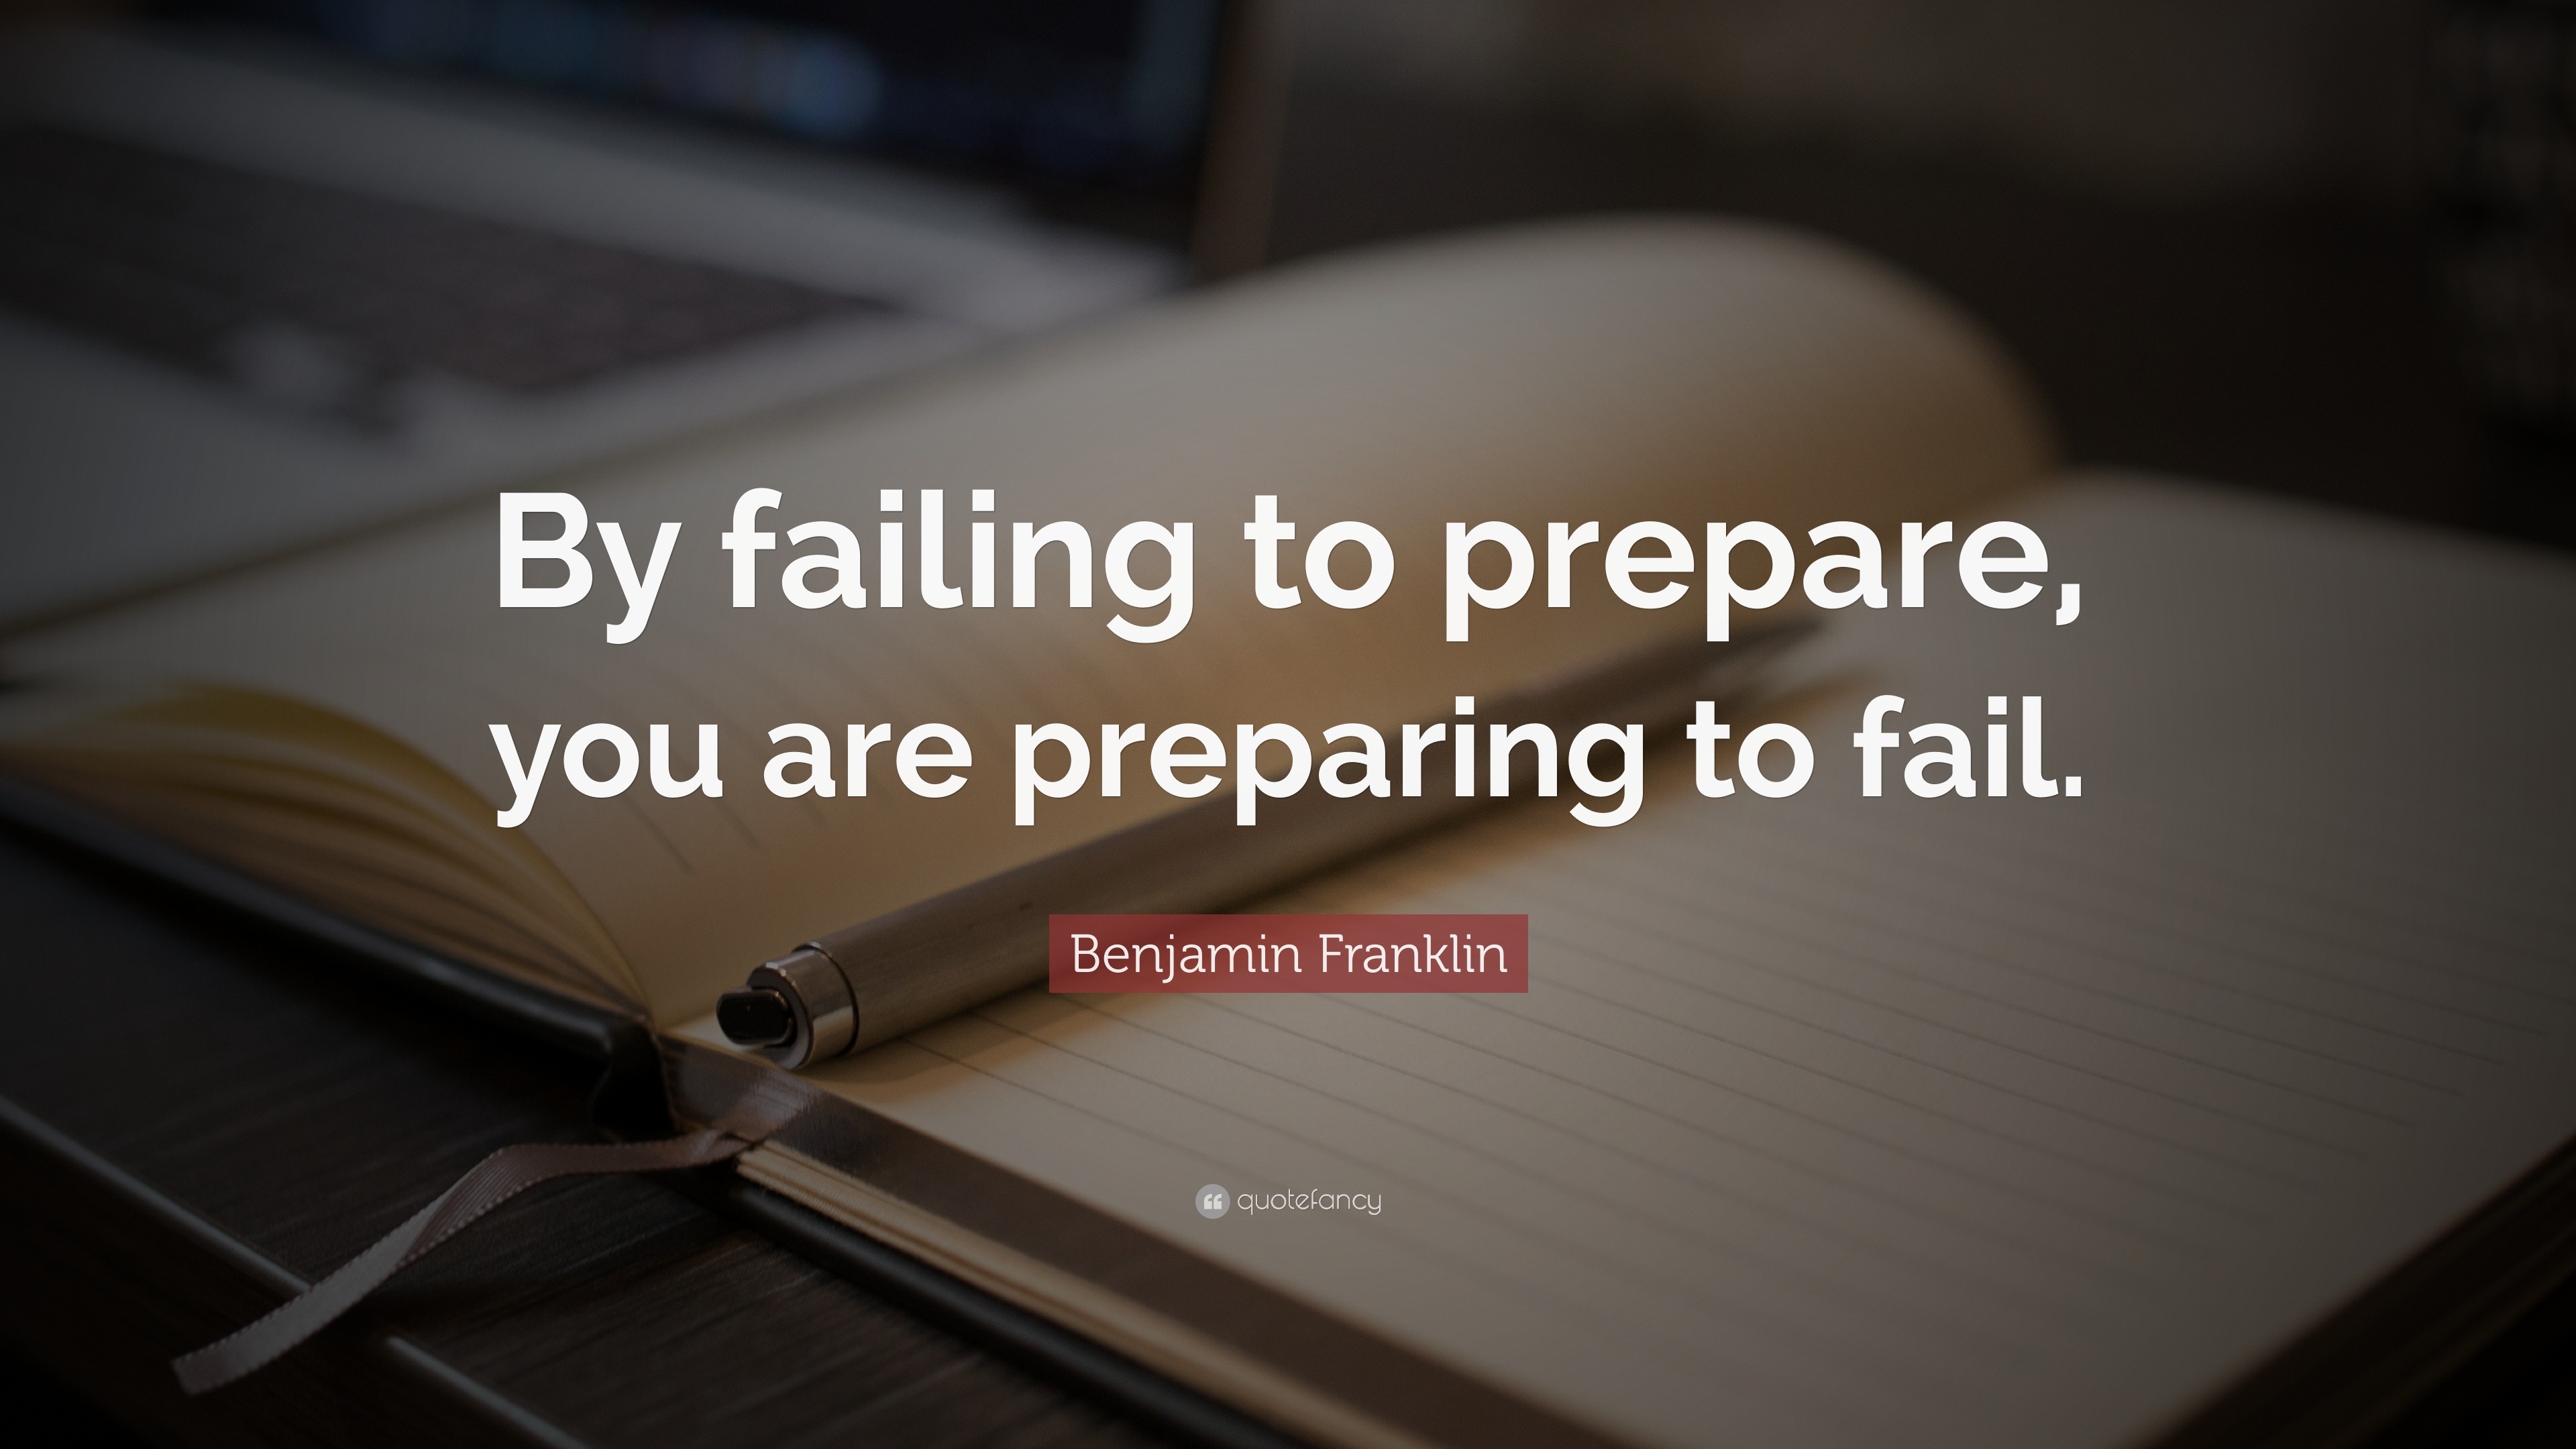 Benjamin Franklin Quote: “By failing to prepare, you are preparing to